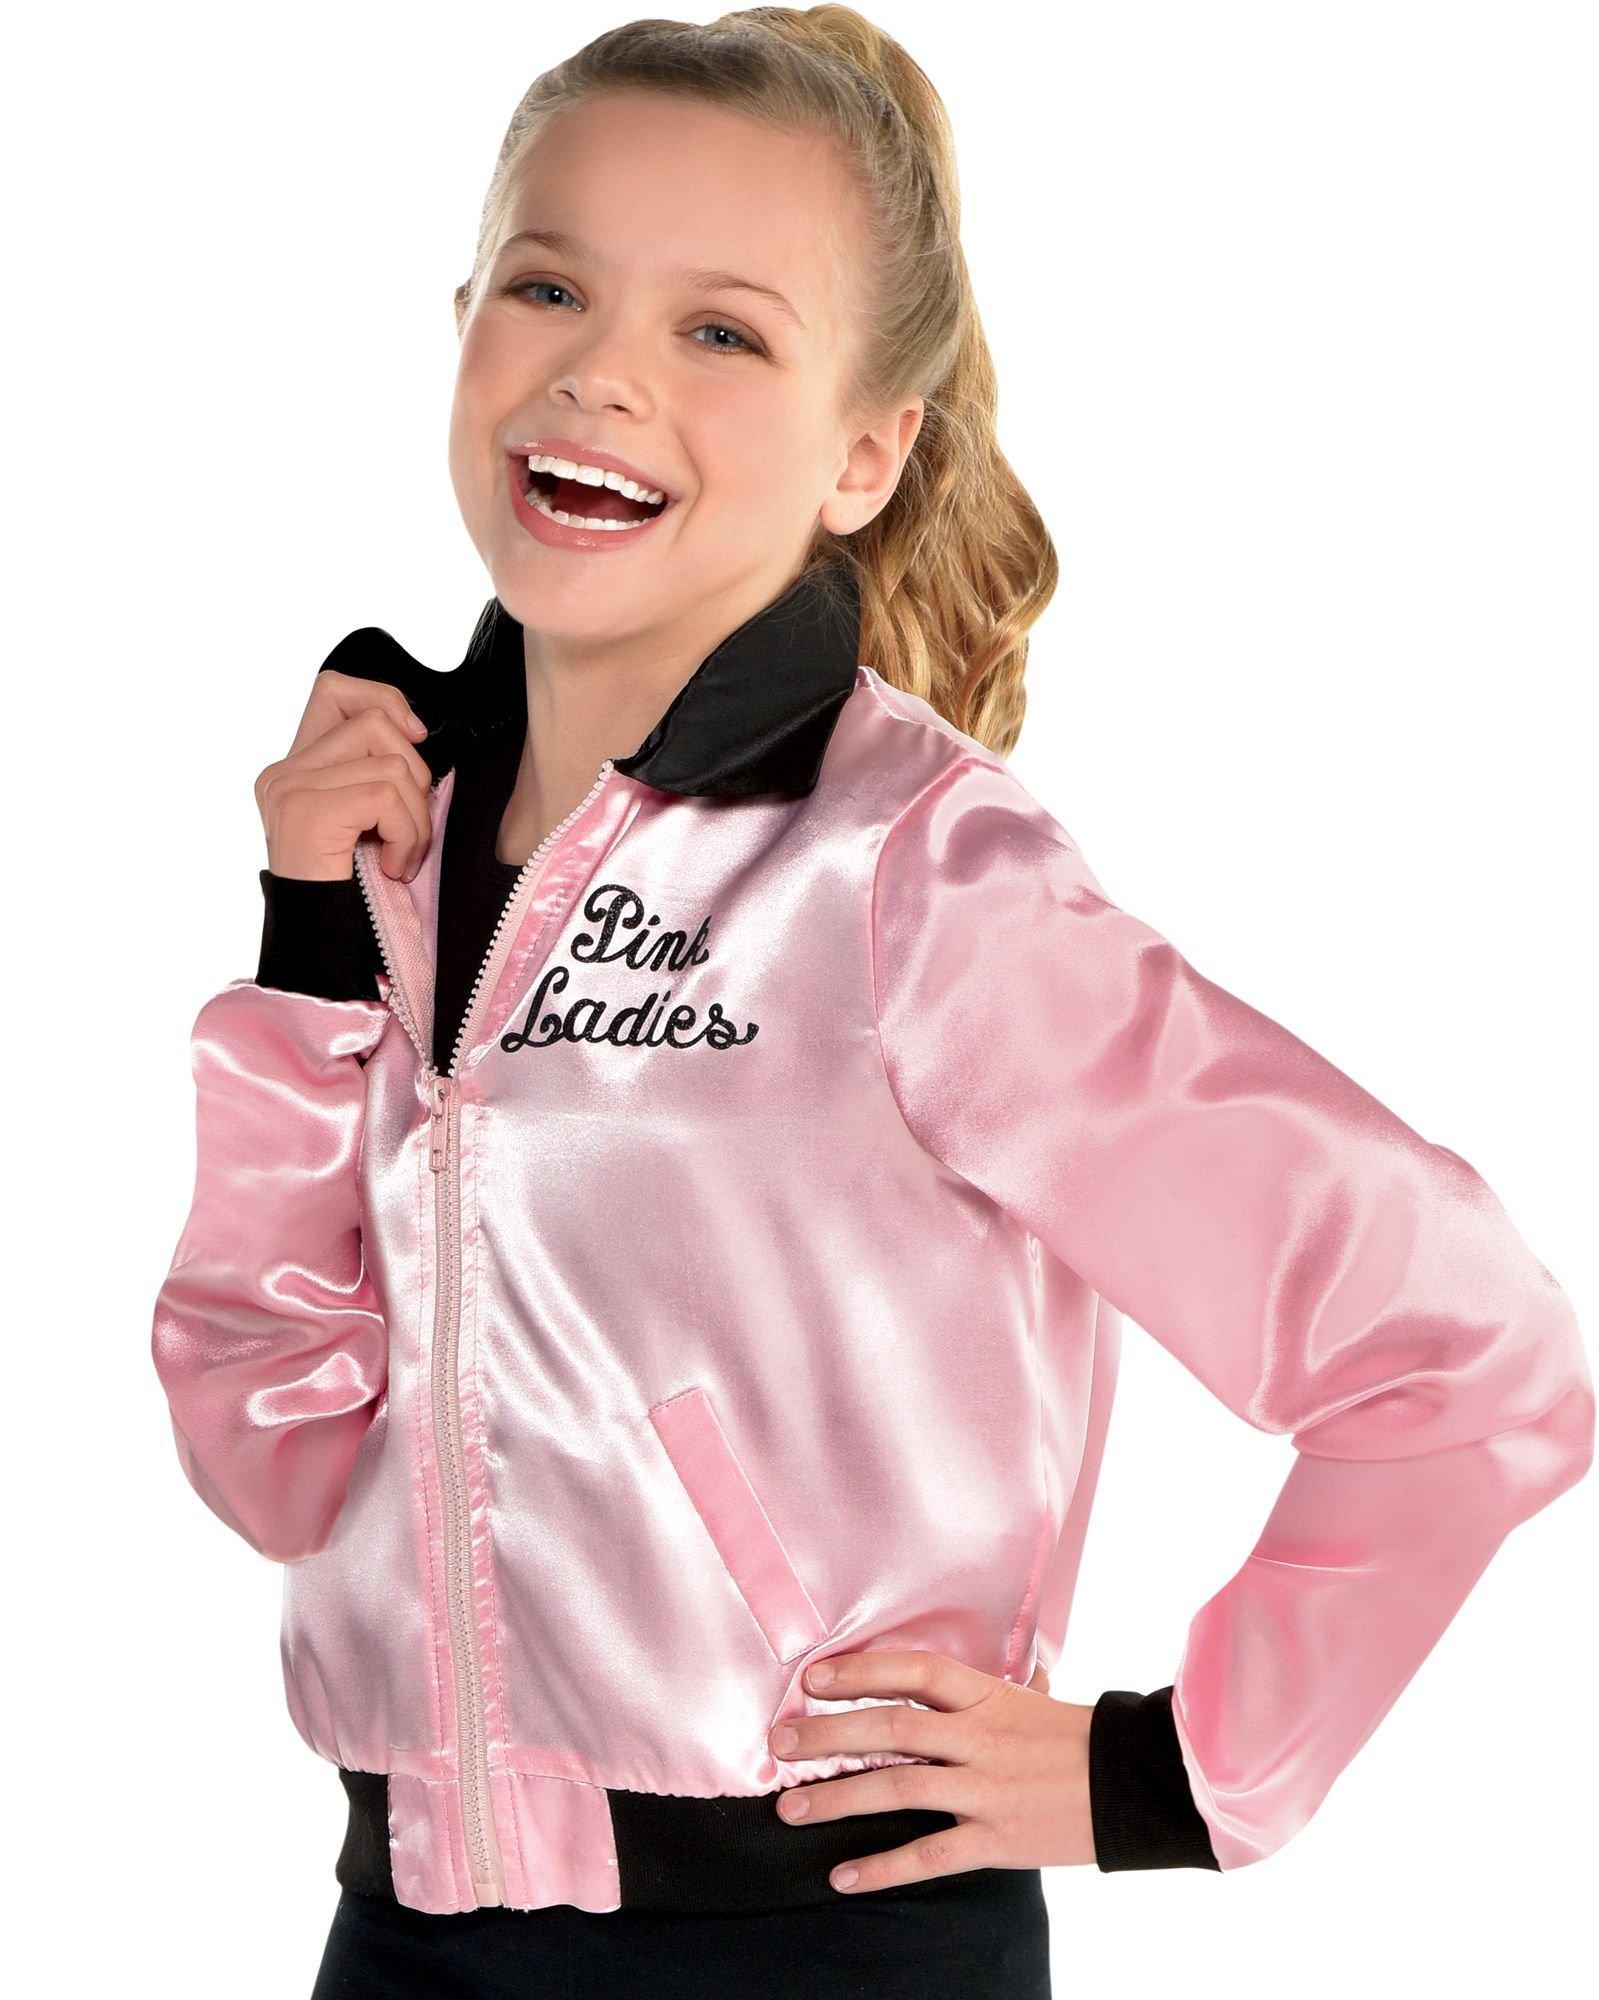 grease costumes for girls